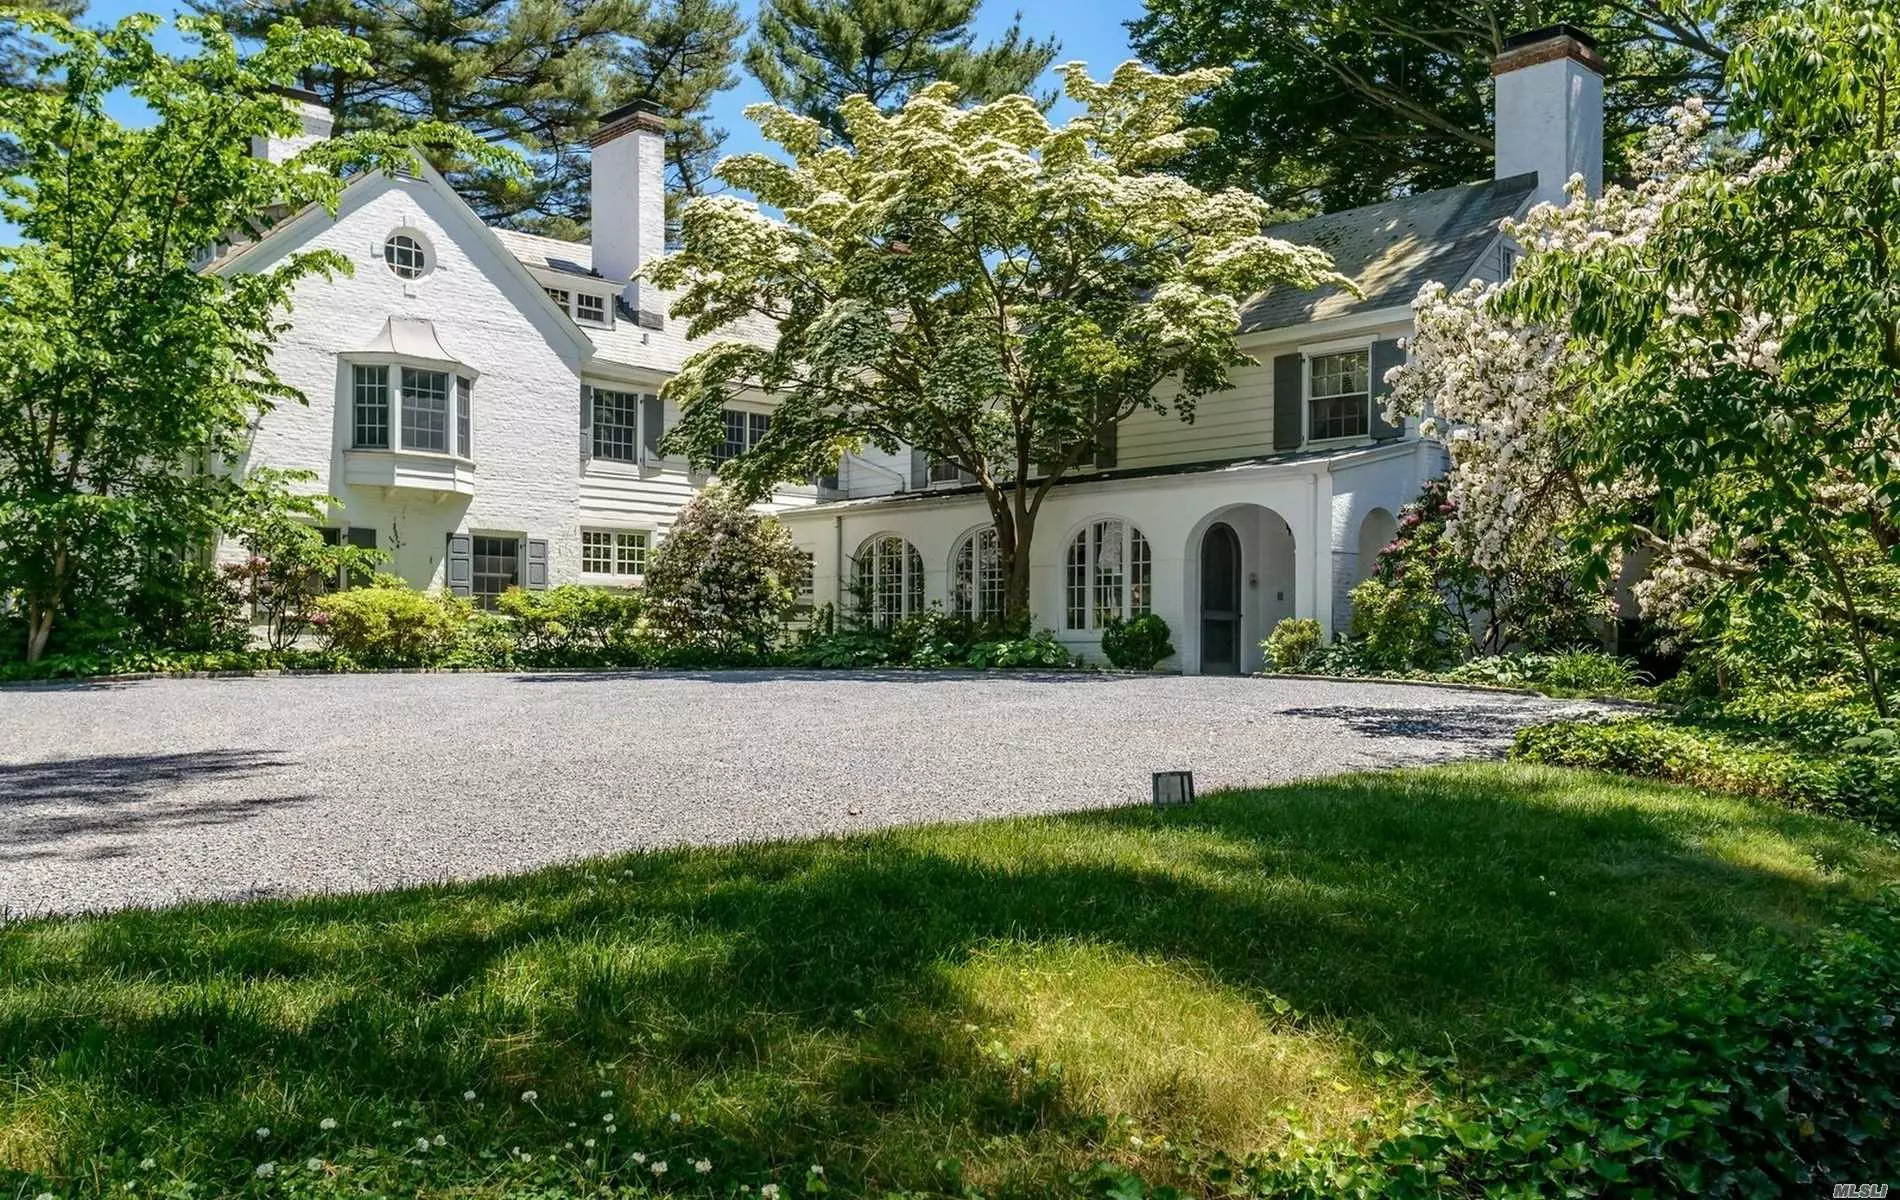 One-Of-A-Kind Magnificent 8650 SqFt 9 BR Restored Gold Coast Estate Set On One Of The Finest Properties In Old Westbury. The 5.59 Glorious Acres In Jericho SD Offers Captivating Vistas-- Also Available For.Rent--$2500--A Separate 3000 SqFt 2-Story:Building That Holds A Sports Complex/Entertainment Center That Contains An Incredible Indoor Basketball Court, Den/Billiard Room, Gym And Gourmet Kitchen. Splendid Pool and Cabana.